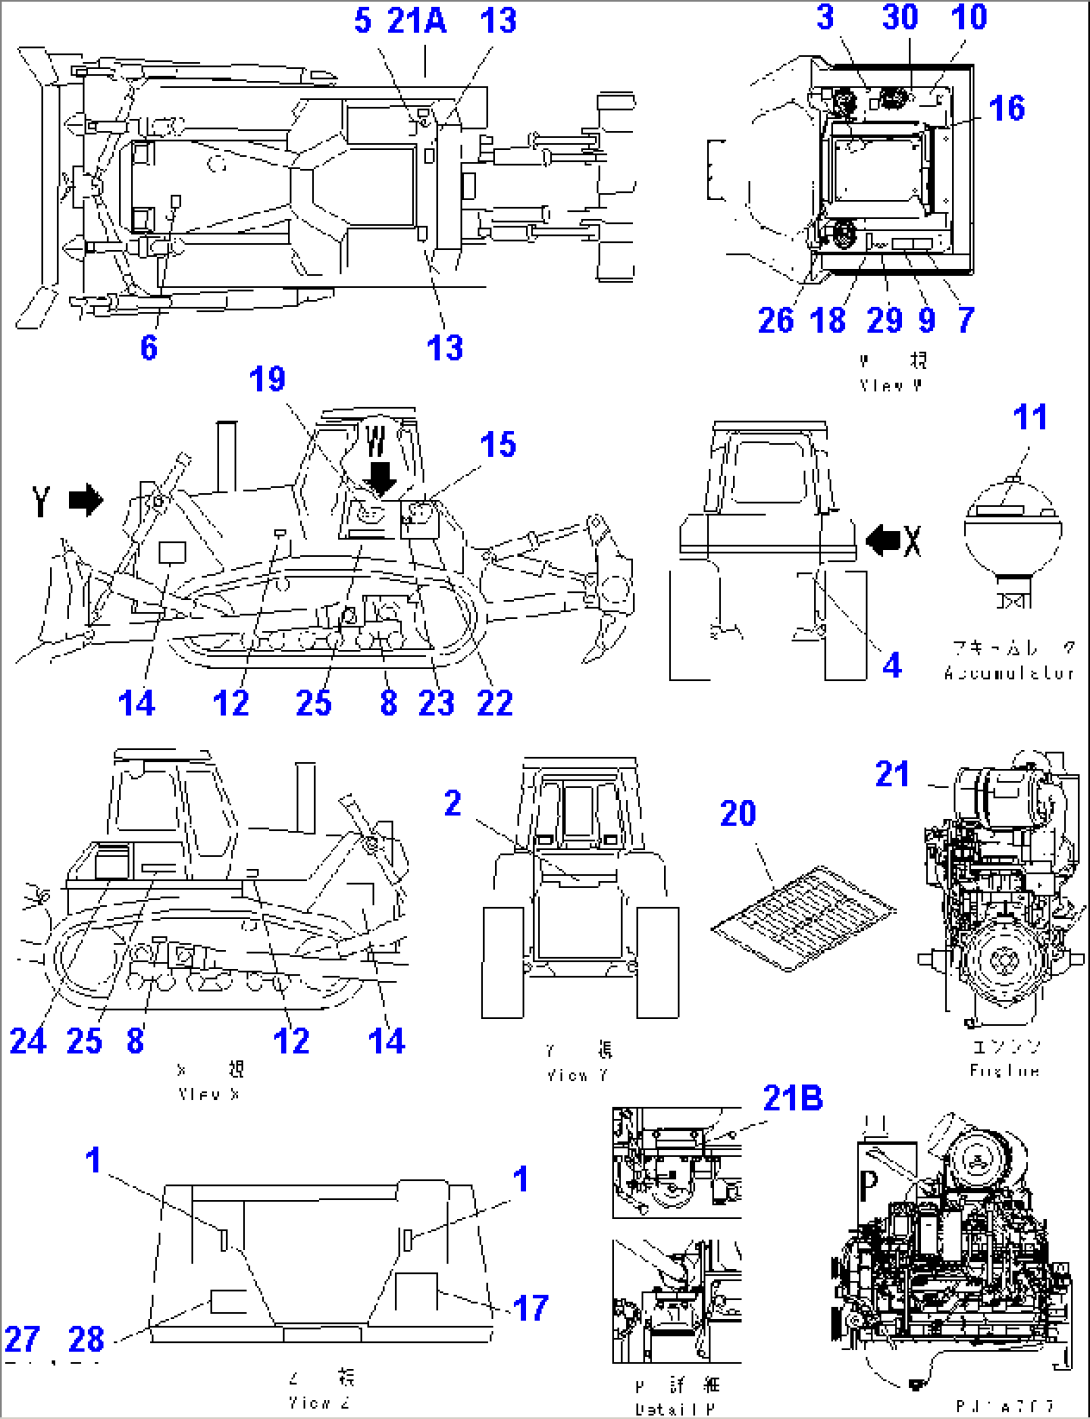 MARKS AND PLATES (PORTUGUESE)(#75001-75999)